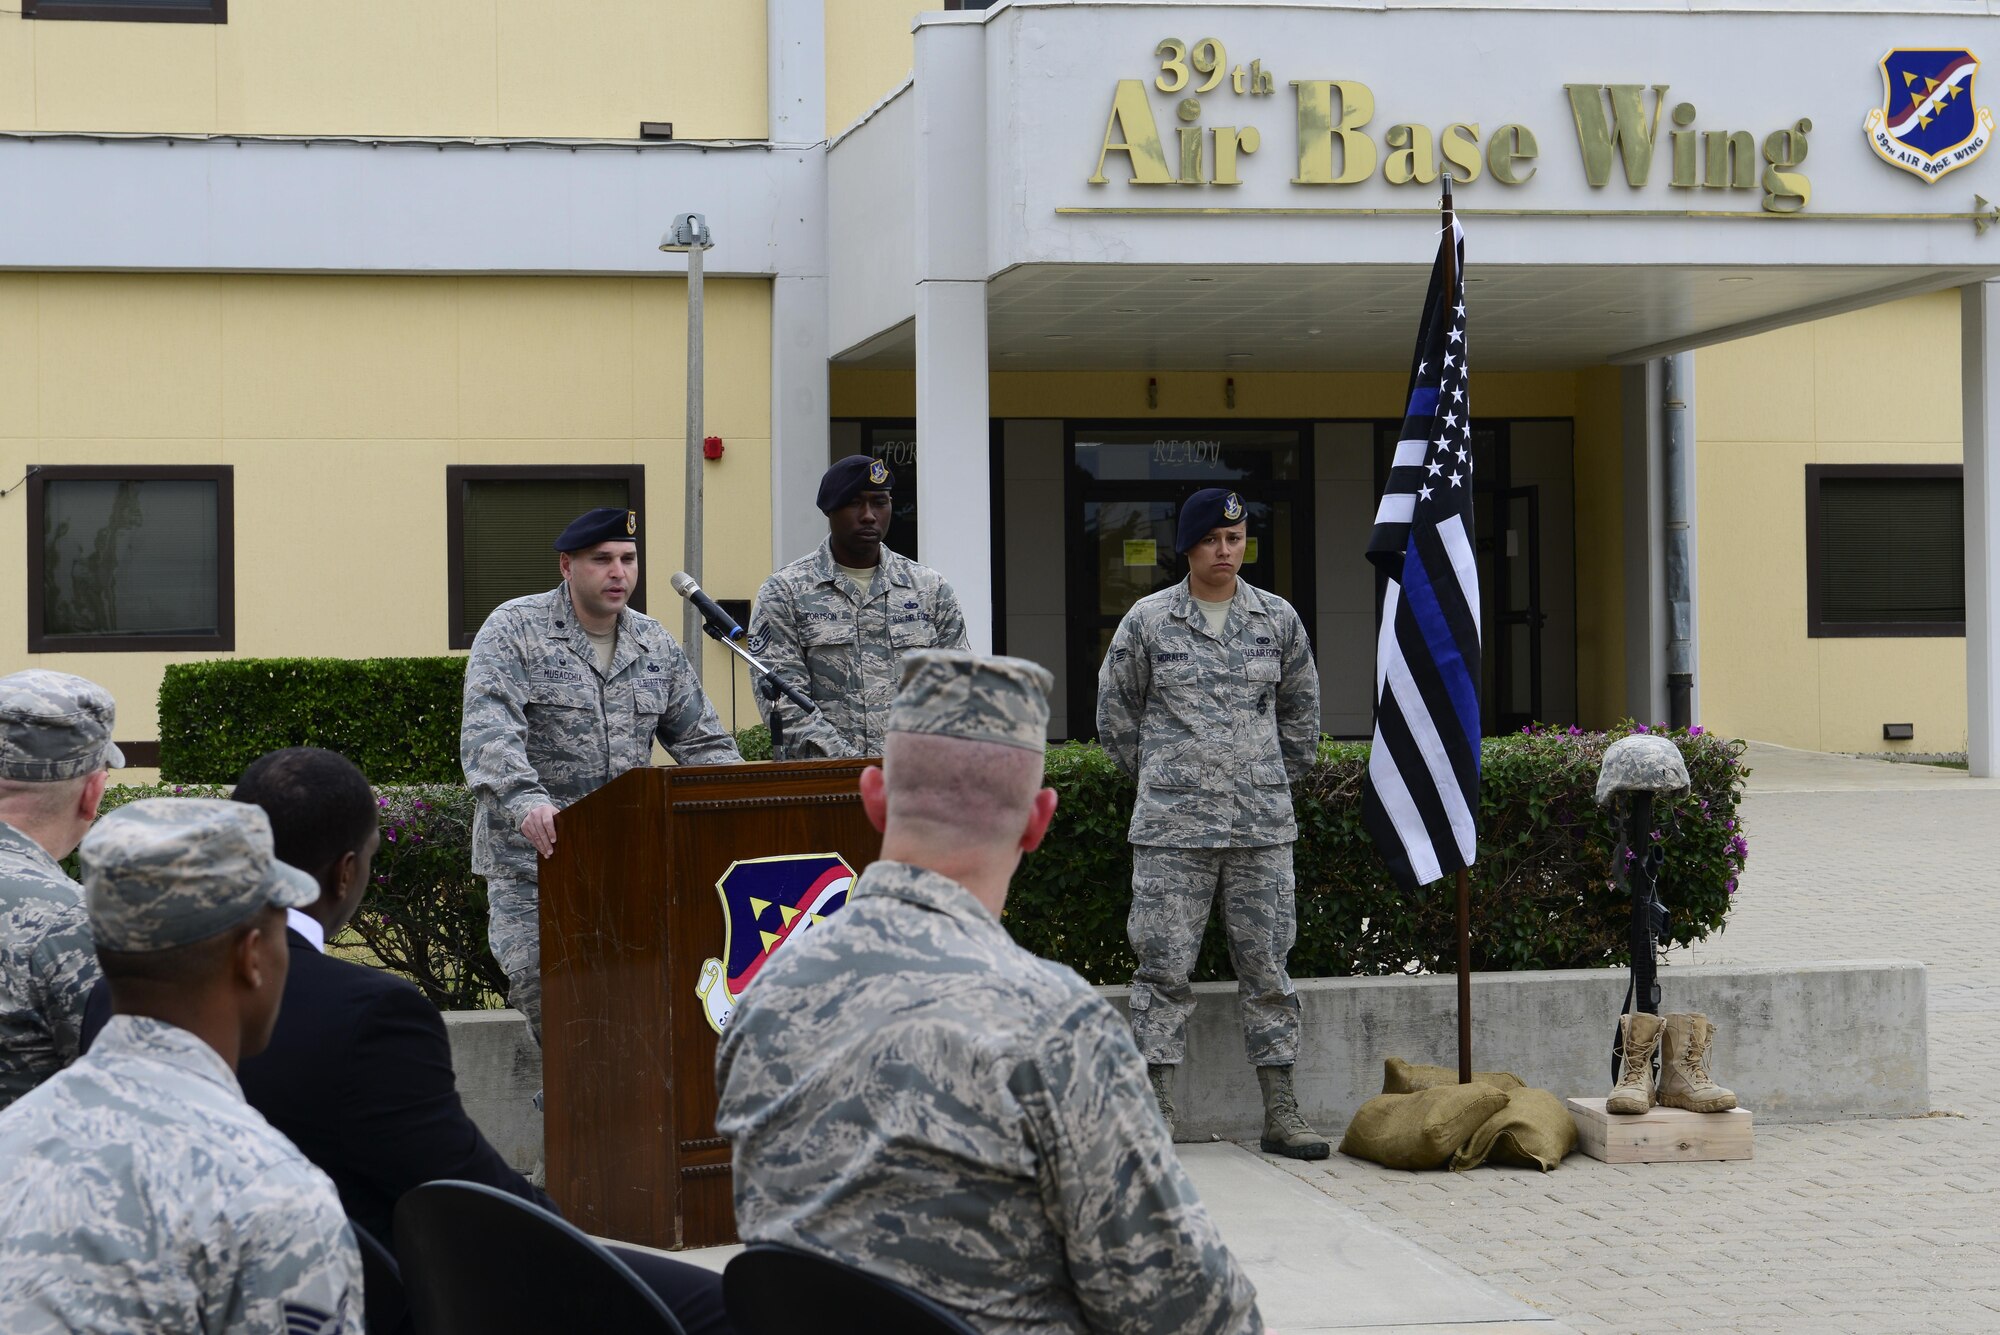 U.S. Air Force Lt. Col. Joseph Musacchia, 39th Security Forces Squadron commander, speaks to those in attendance during a National Police Week retreat ceremony May 15, 2016, at Incirlik Air Base, Turkey. Defenders and their counterparts dedicated this time to remember fallen comrades. (U.S. Air Force photo by Staff Sgt. Caleb Pierce/Released) 